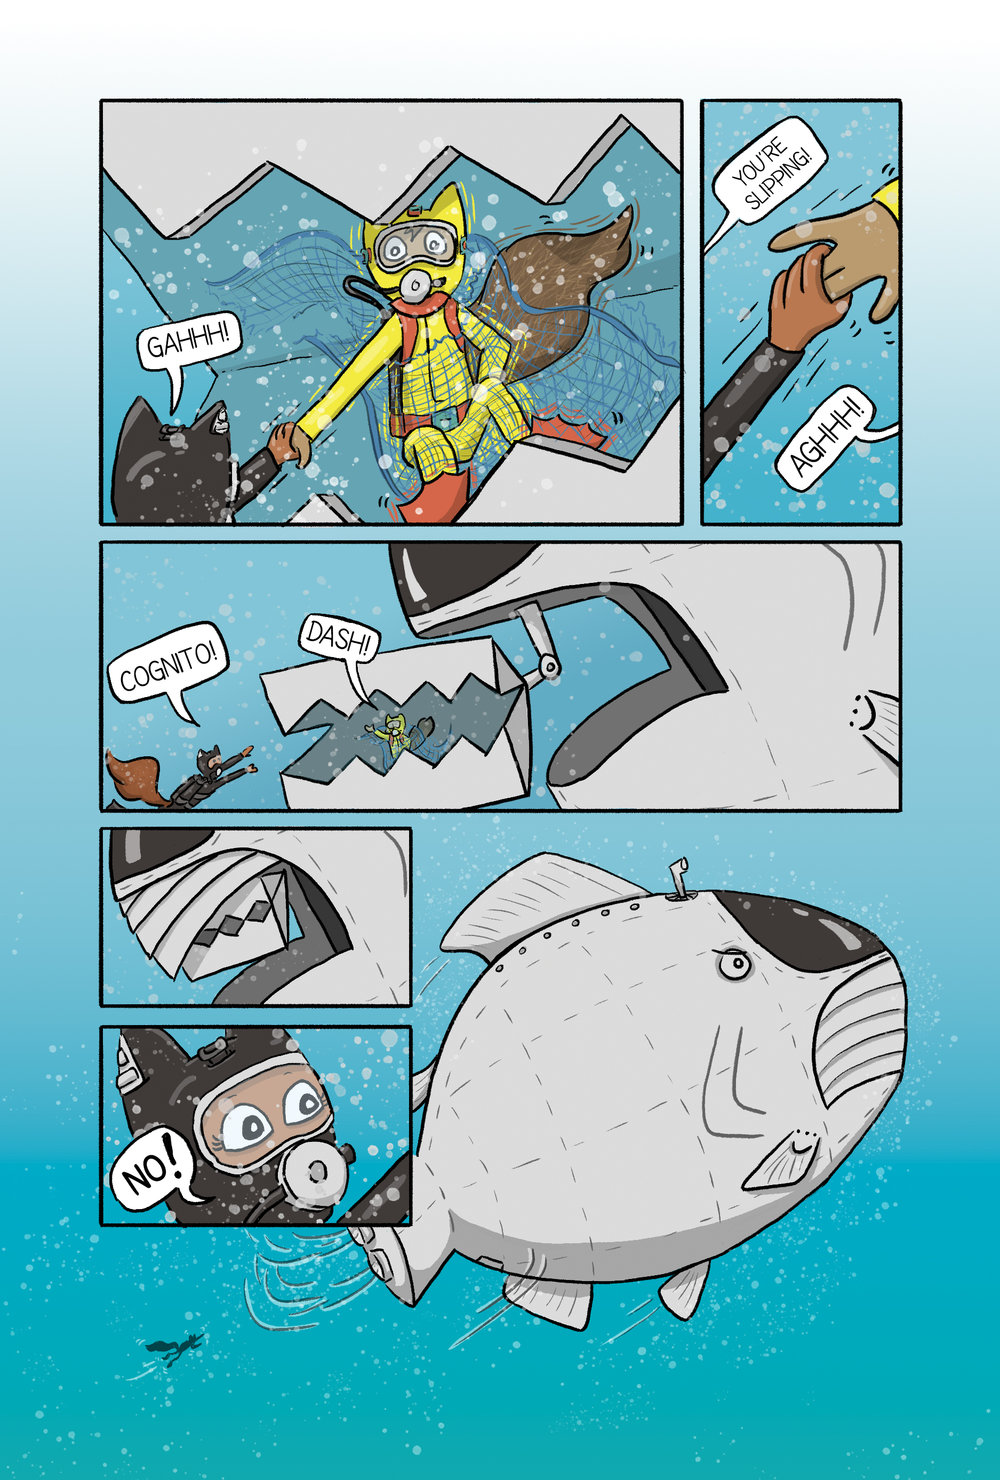 Page 24 A giant fish-shaped submarine captures Cognito and takes him away from Dash